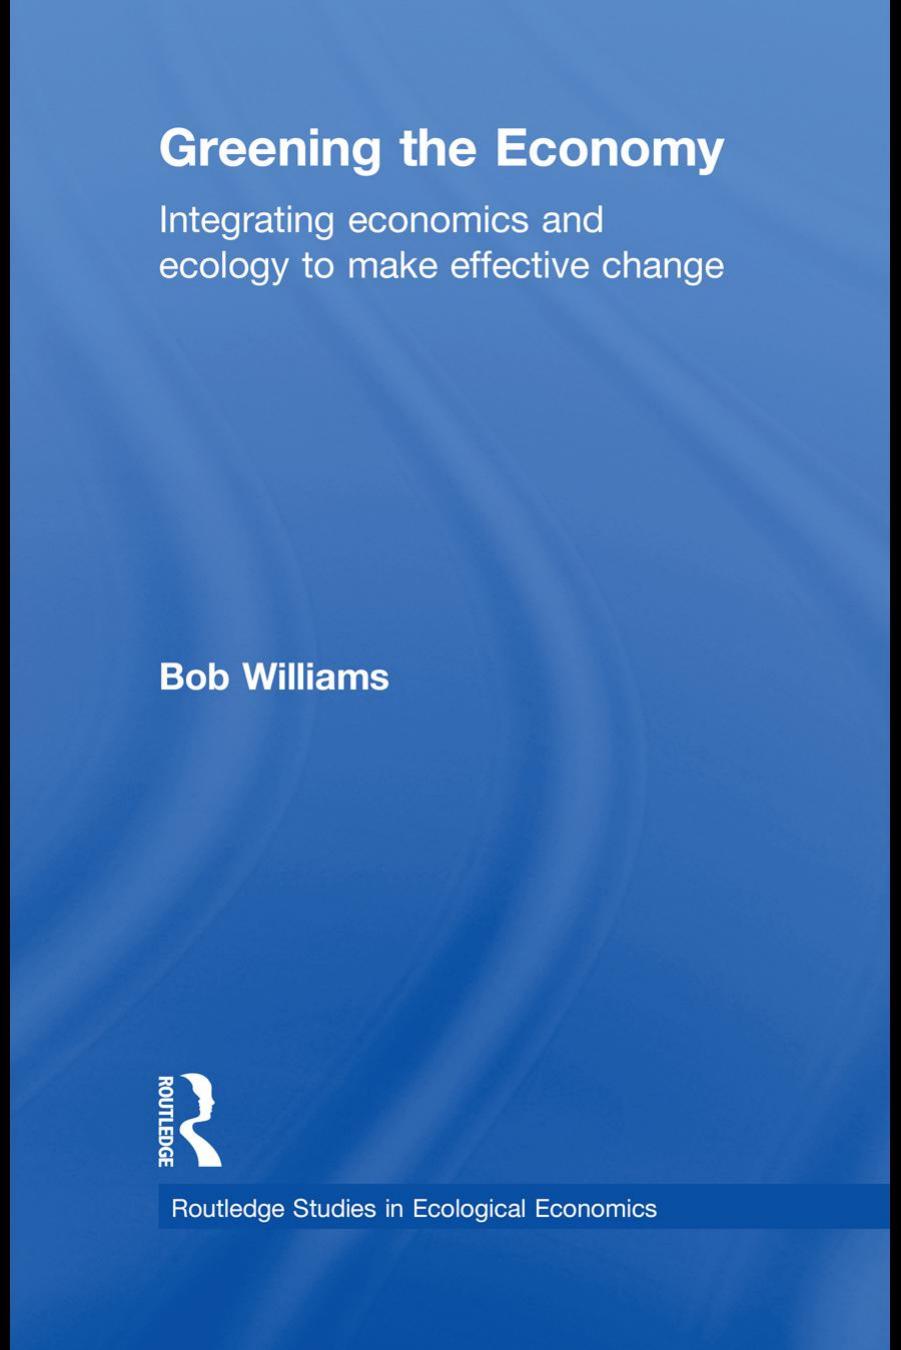 Greening the Economy : Integrating Economics and Ecology to Make Effective Change by Robert B. Williams; Robert B Williams